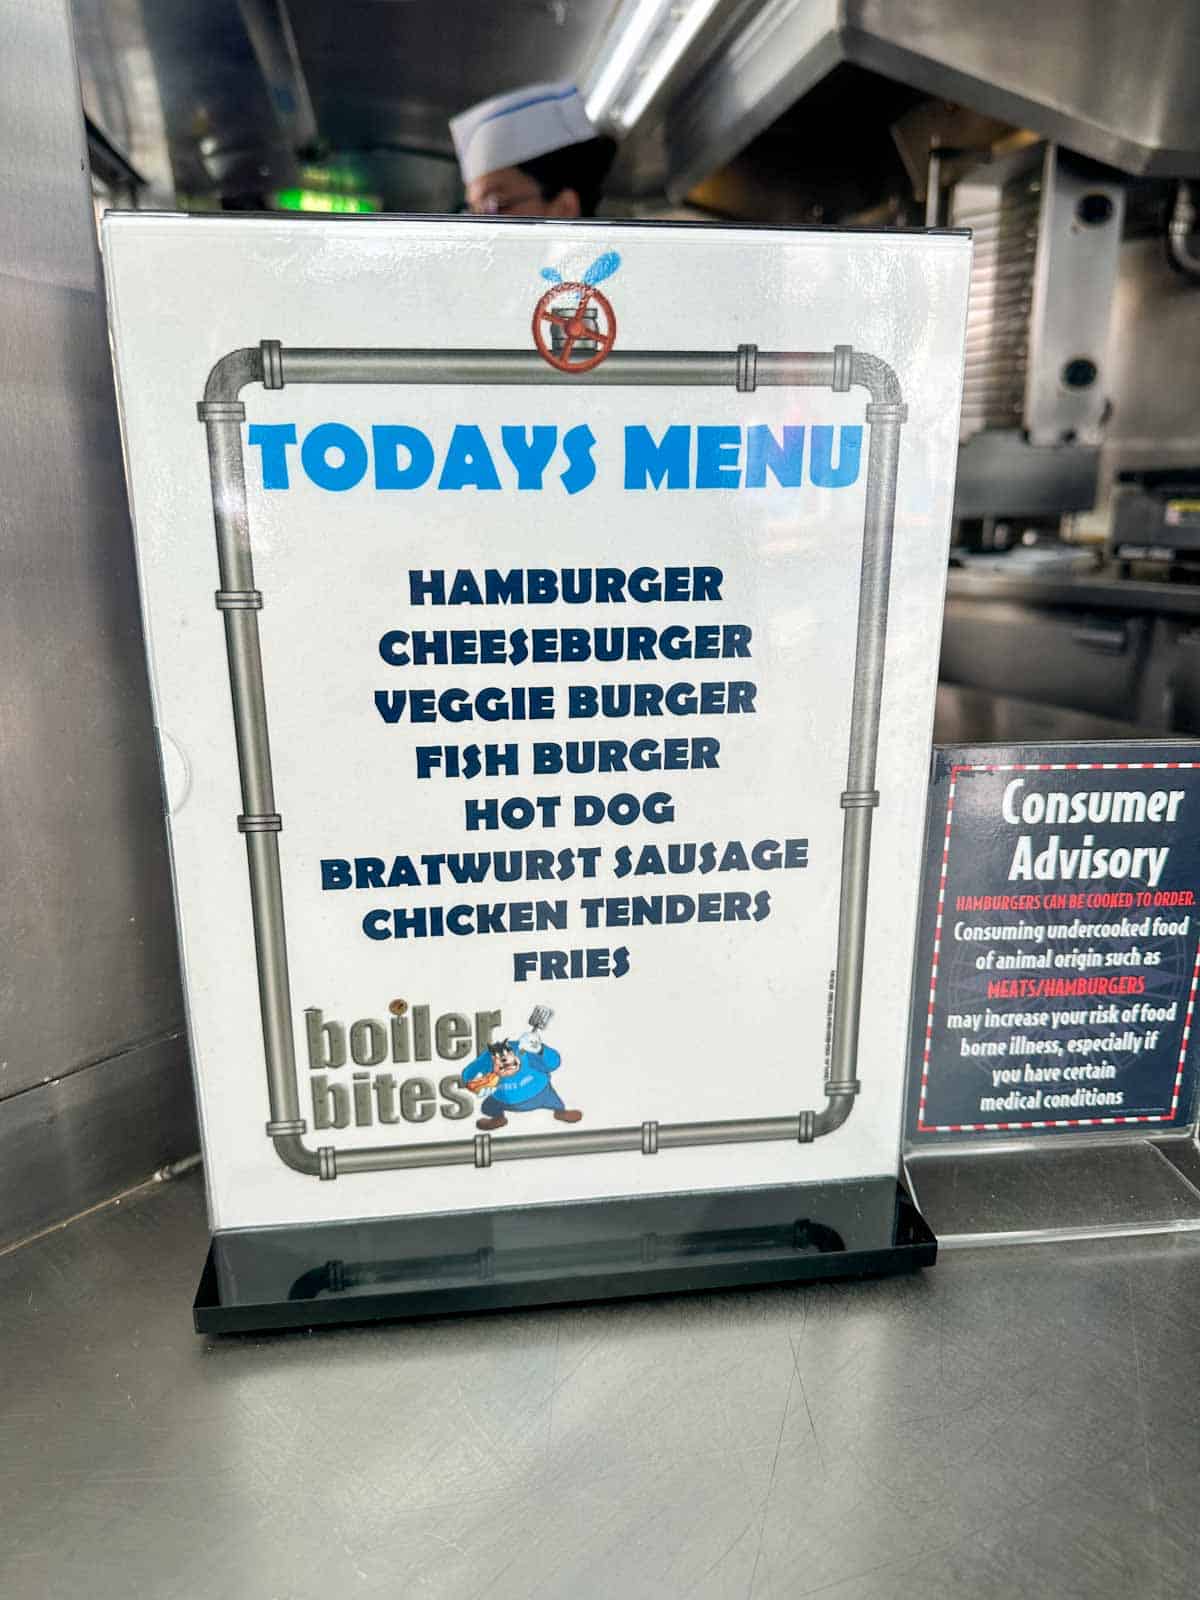 A white sign with blue writing for Today's menu listing grill items like burgers and hot dogs.